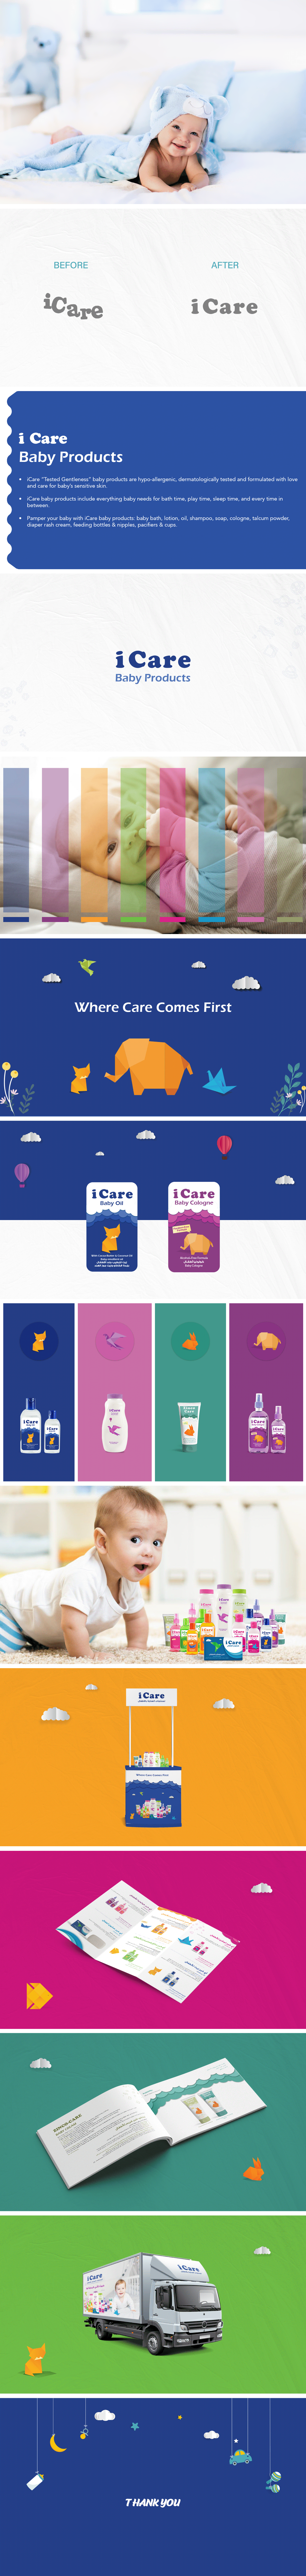 baby product baby care Packaging brand identity Logo Design visual identity Social media post designer graphics